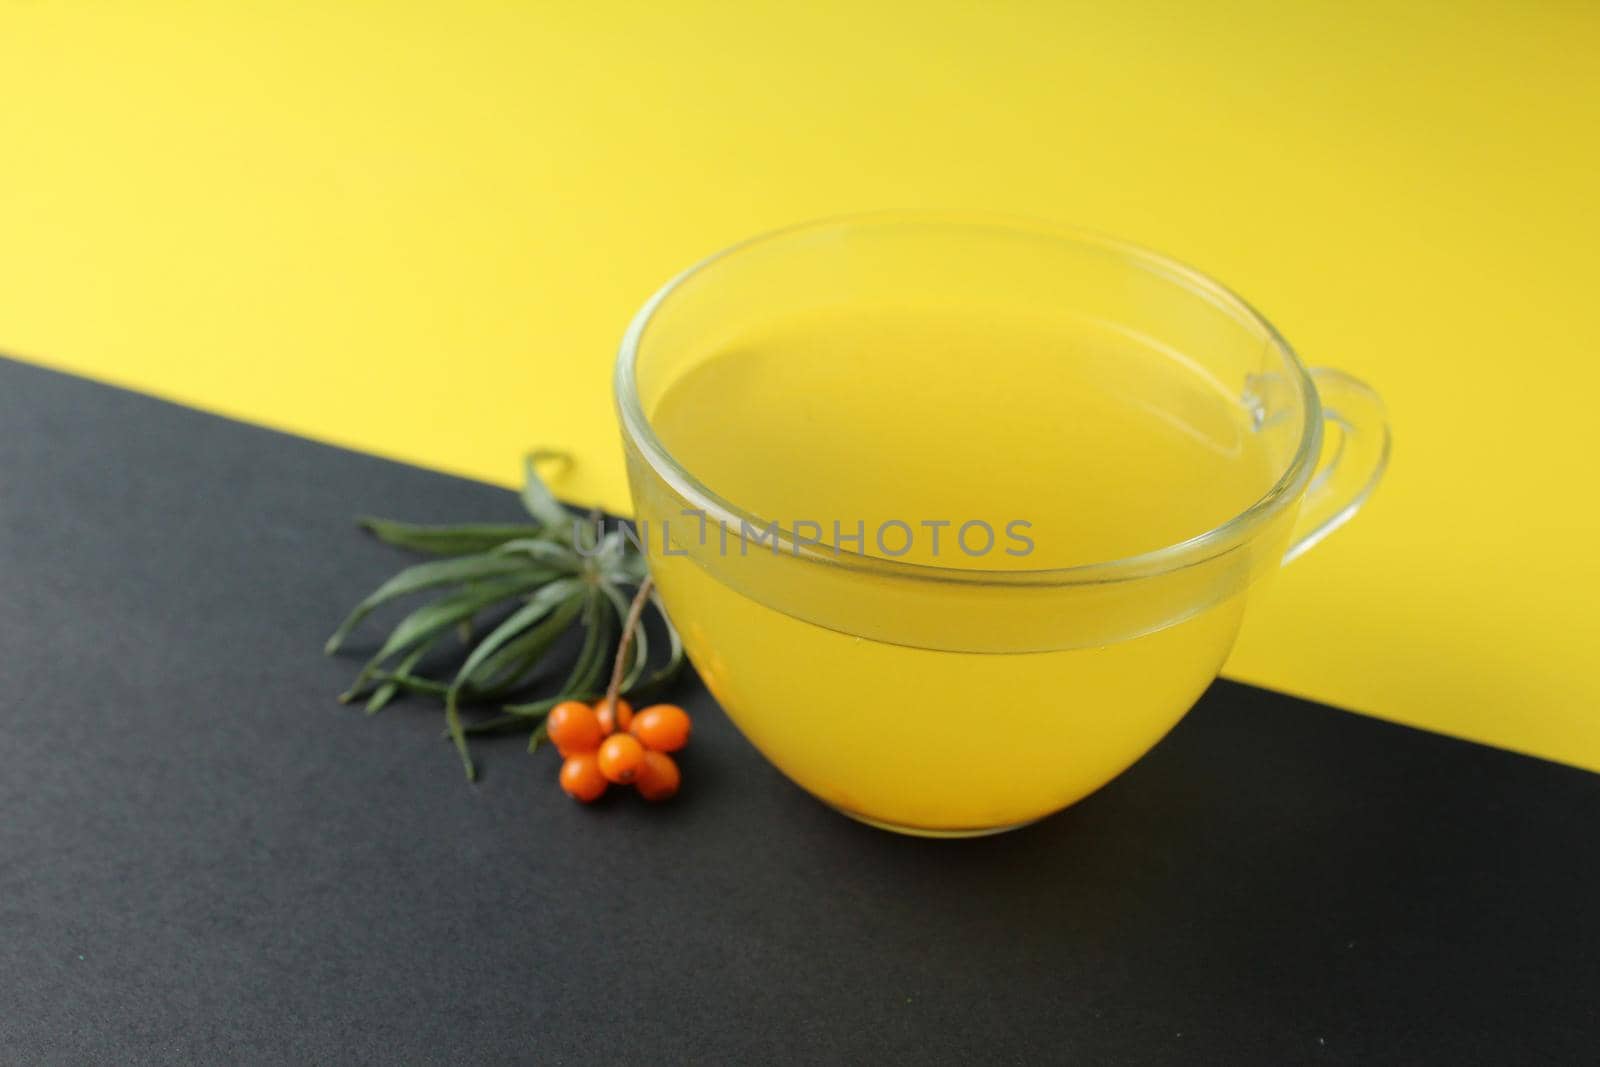 sea buckthorn tea drink on a black yellow bright background. Sea buckthorn drink tea juice in a glass cup next to a spout of sea buckthorn leaves orange berries on a black and yellow background. Creative creative photography. Seasonal berry.